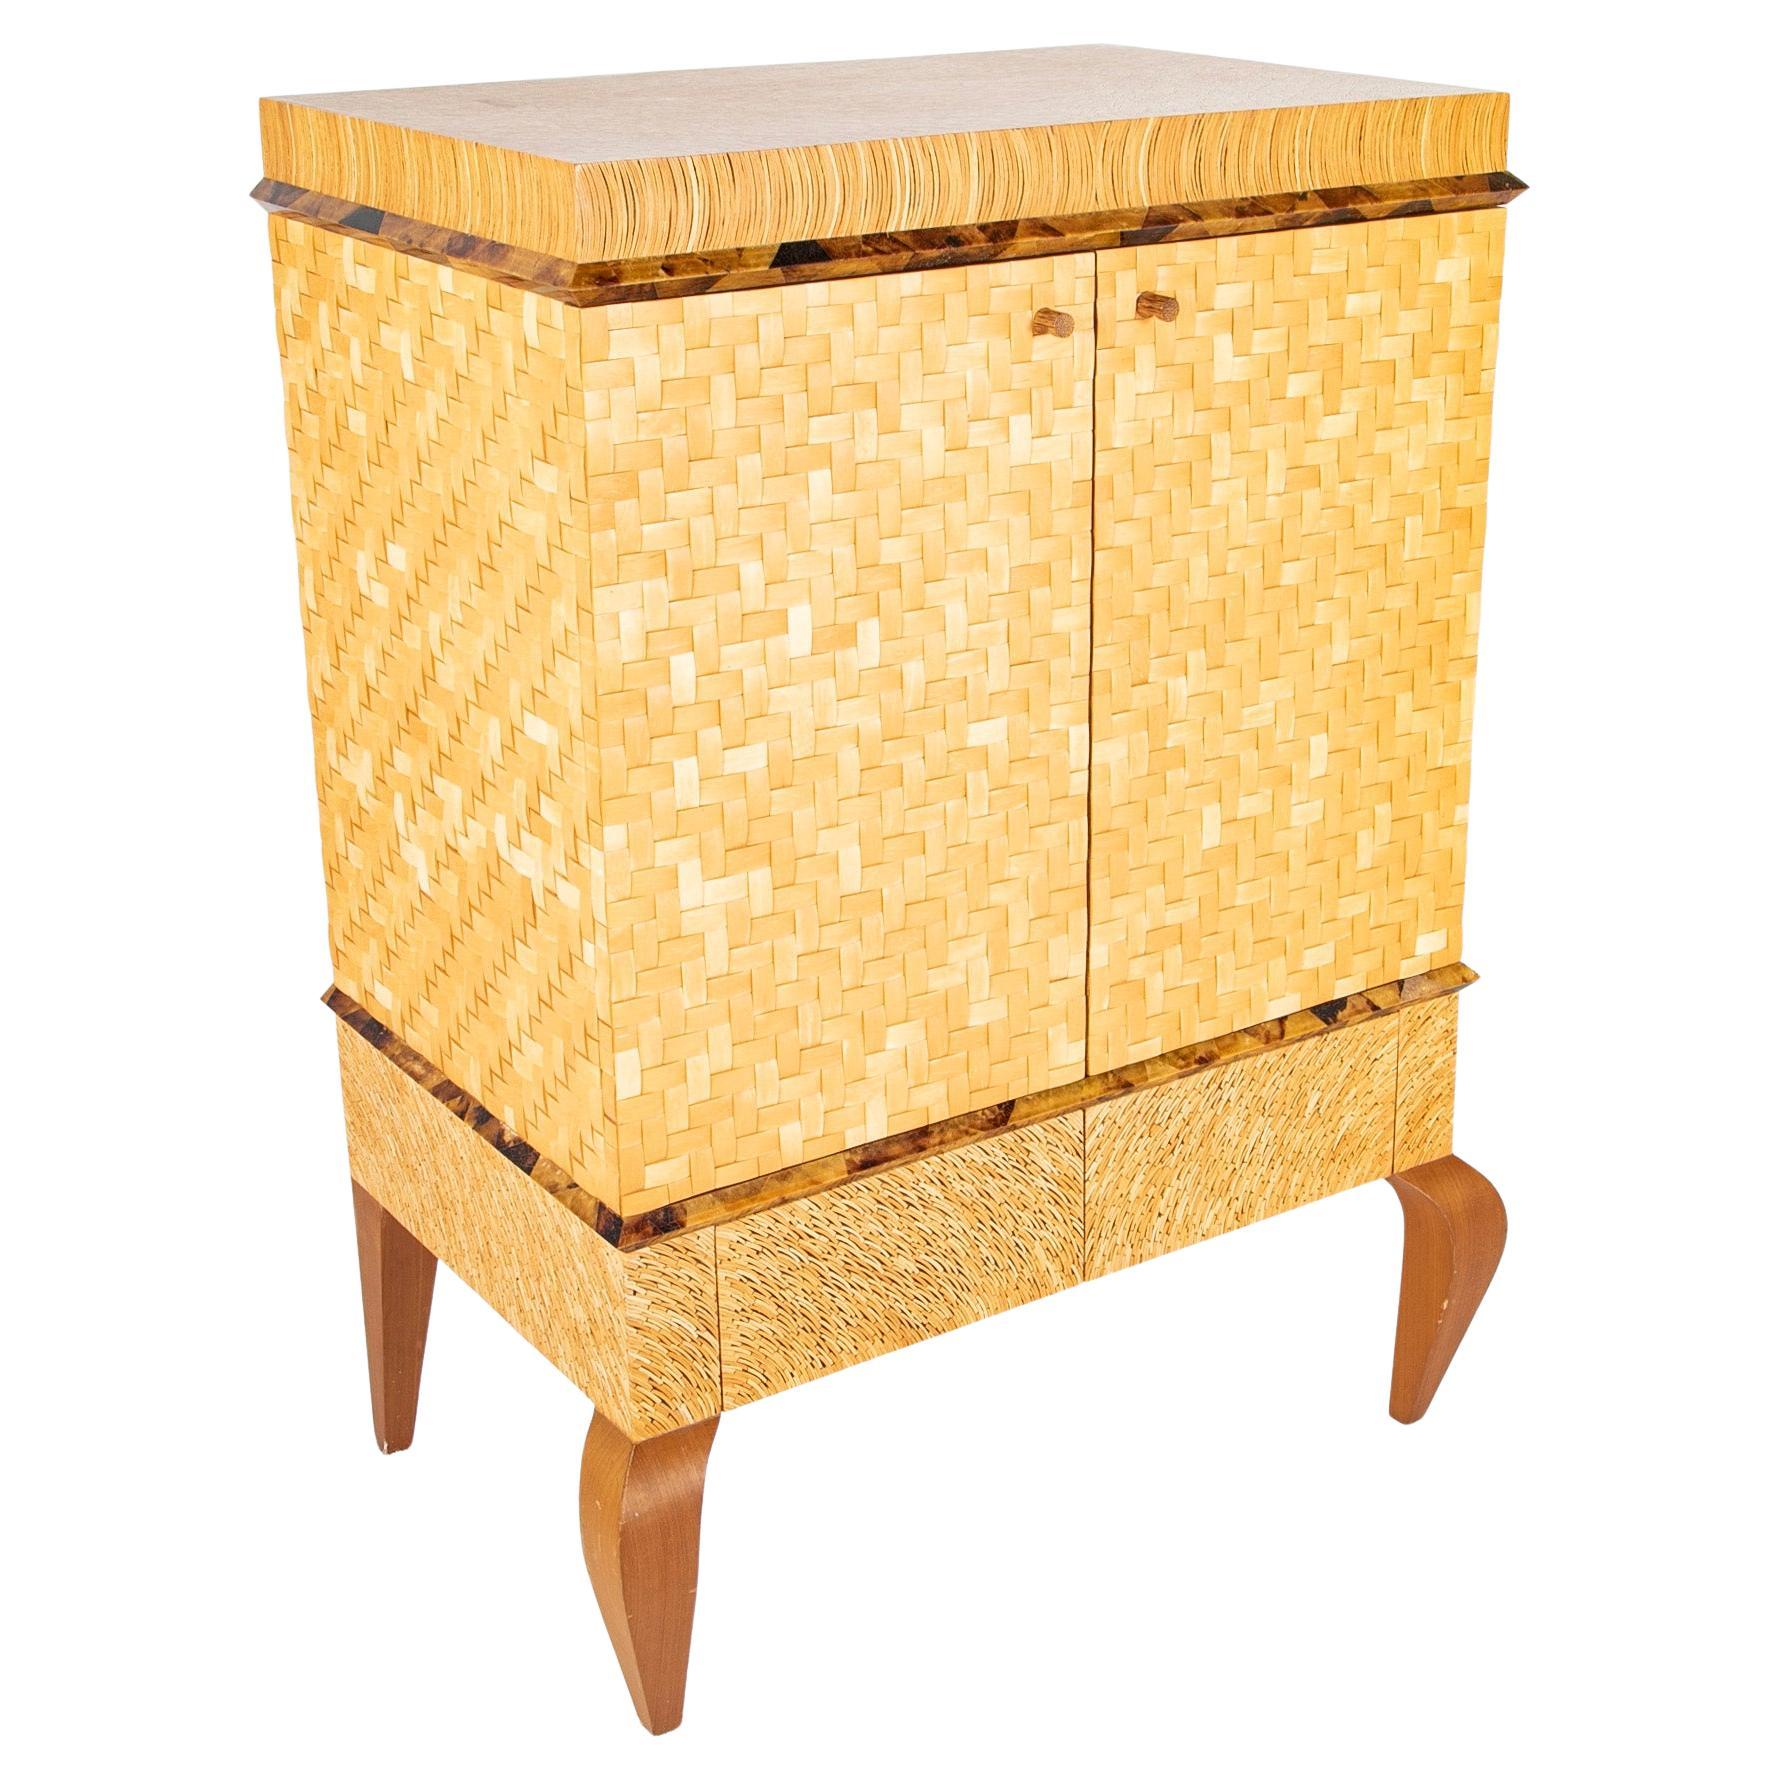 R & Y Augousti Style Lacquered Bamboo, Pen Shell and Egg Shell Cabinet 